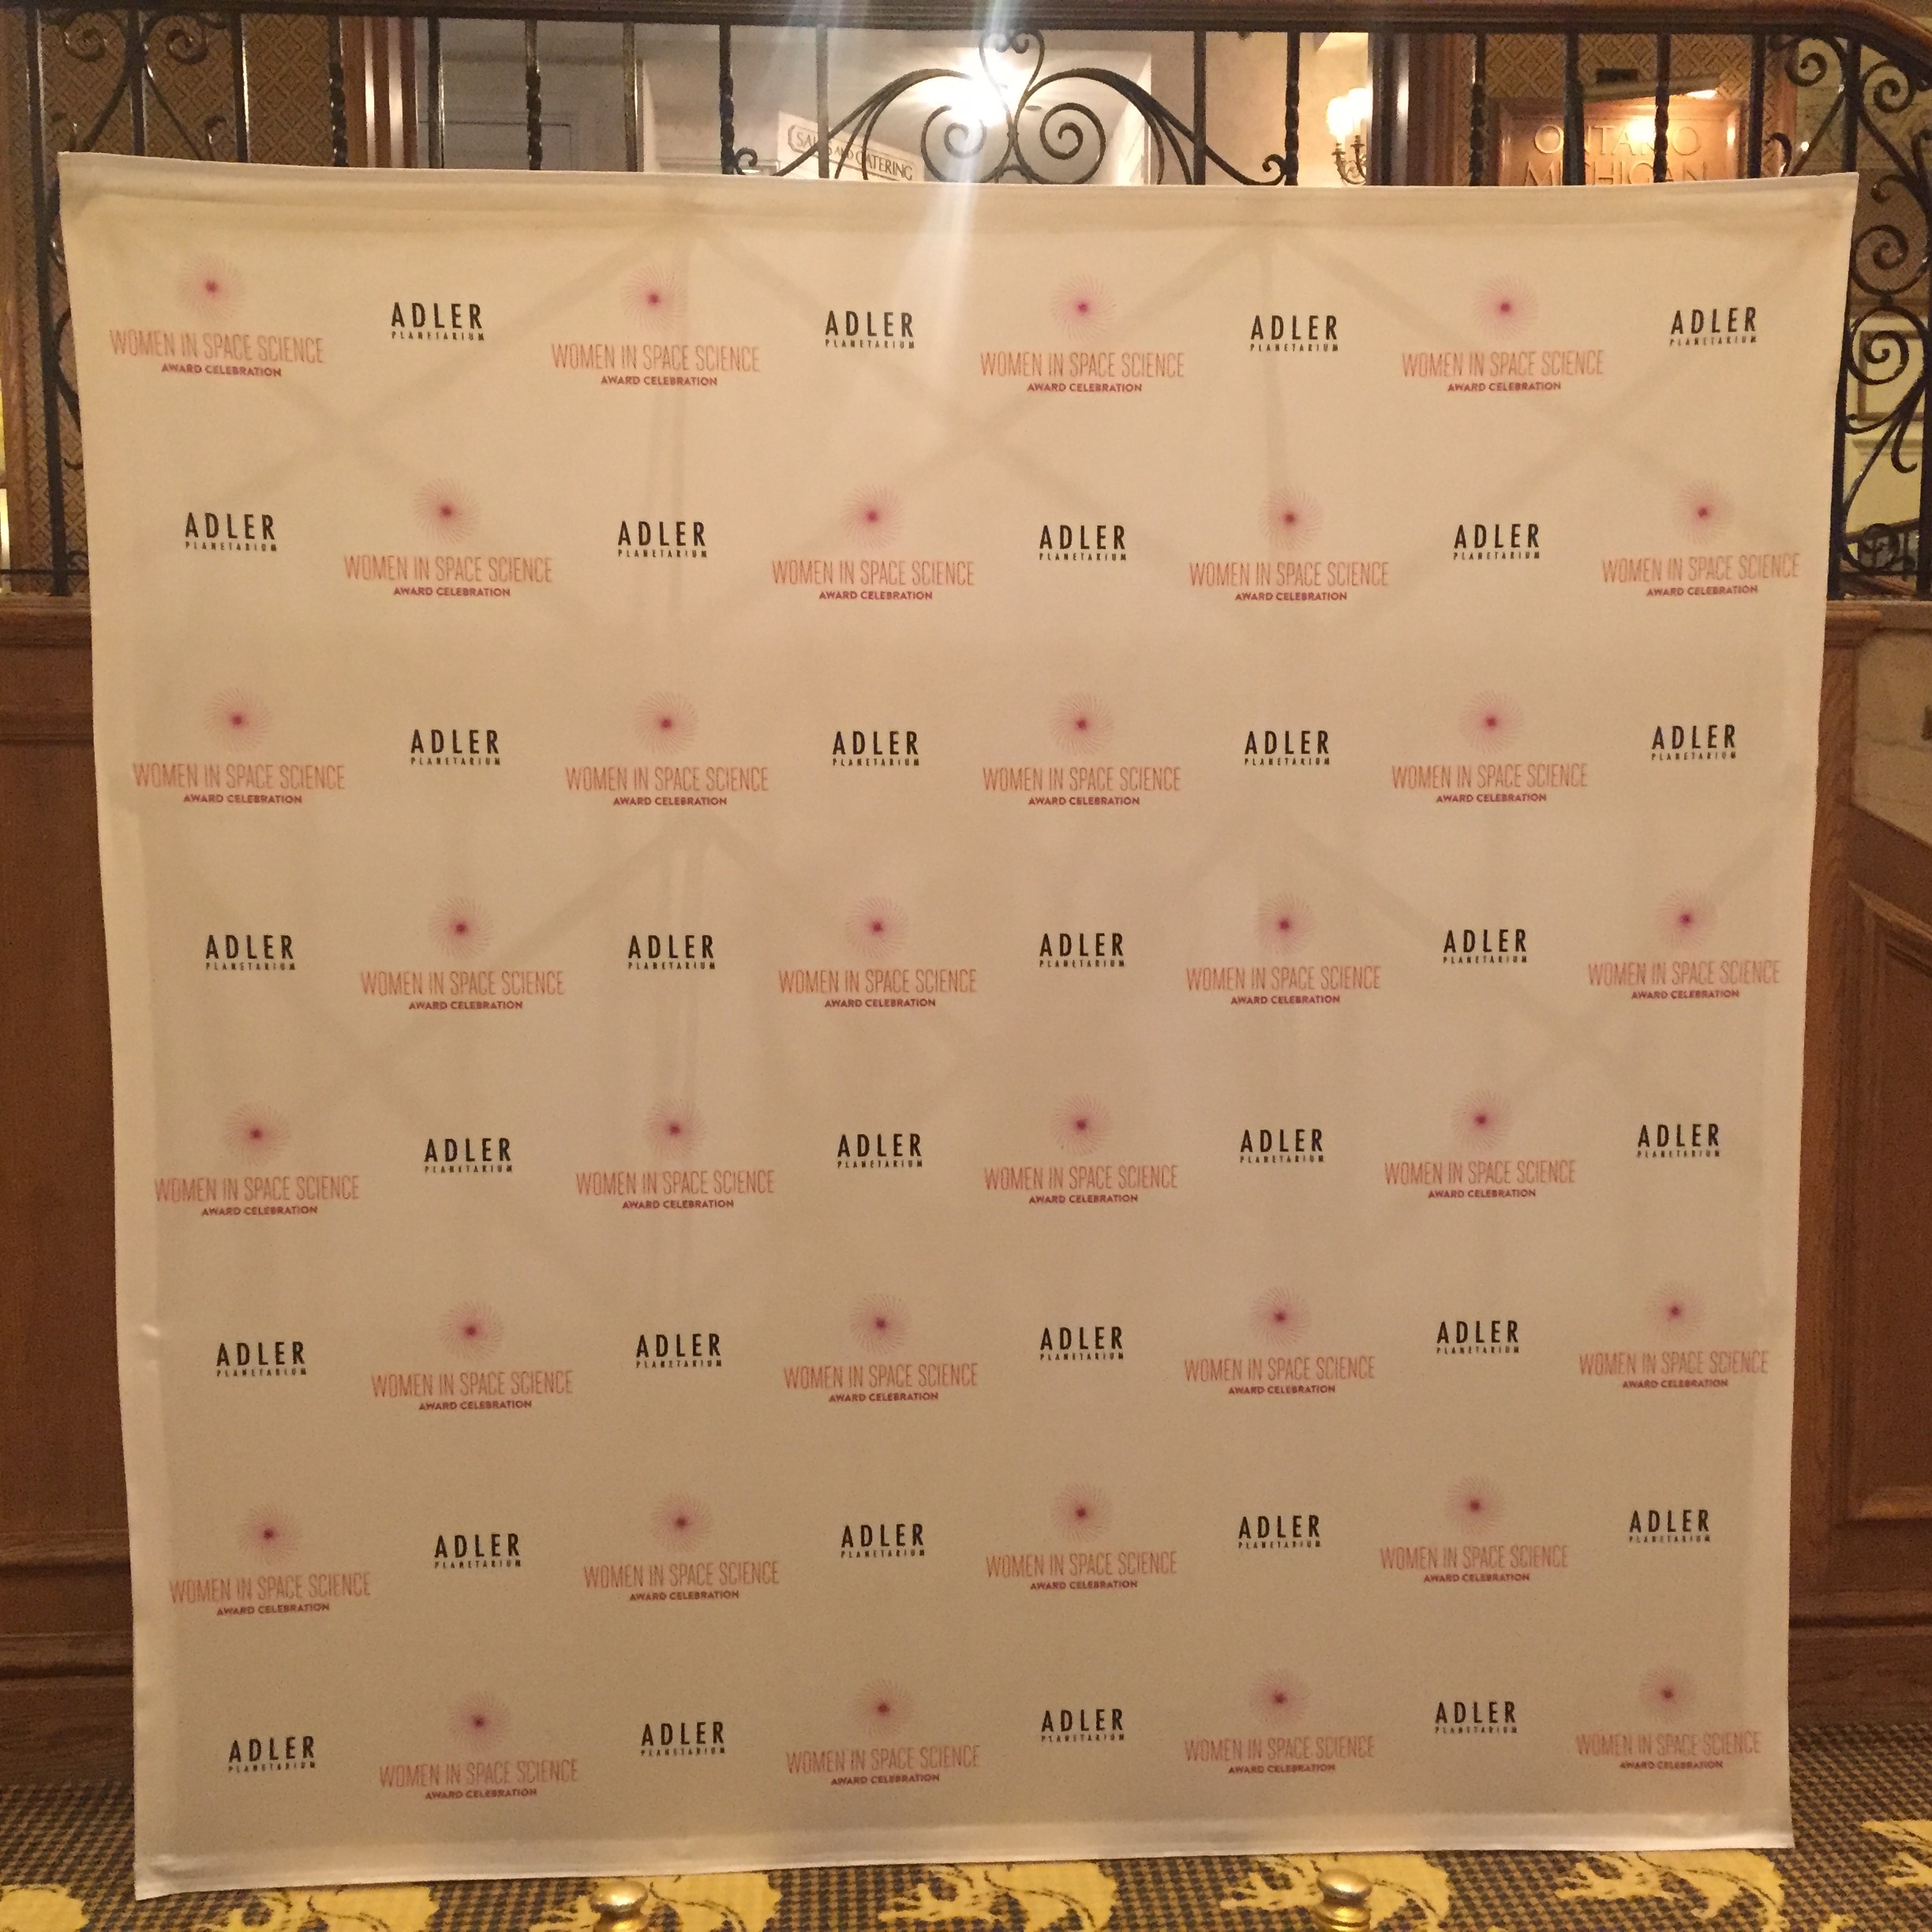 Step and repeat banner promoting women in space science